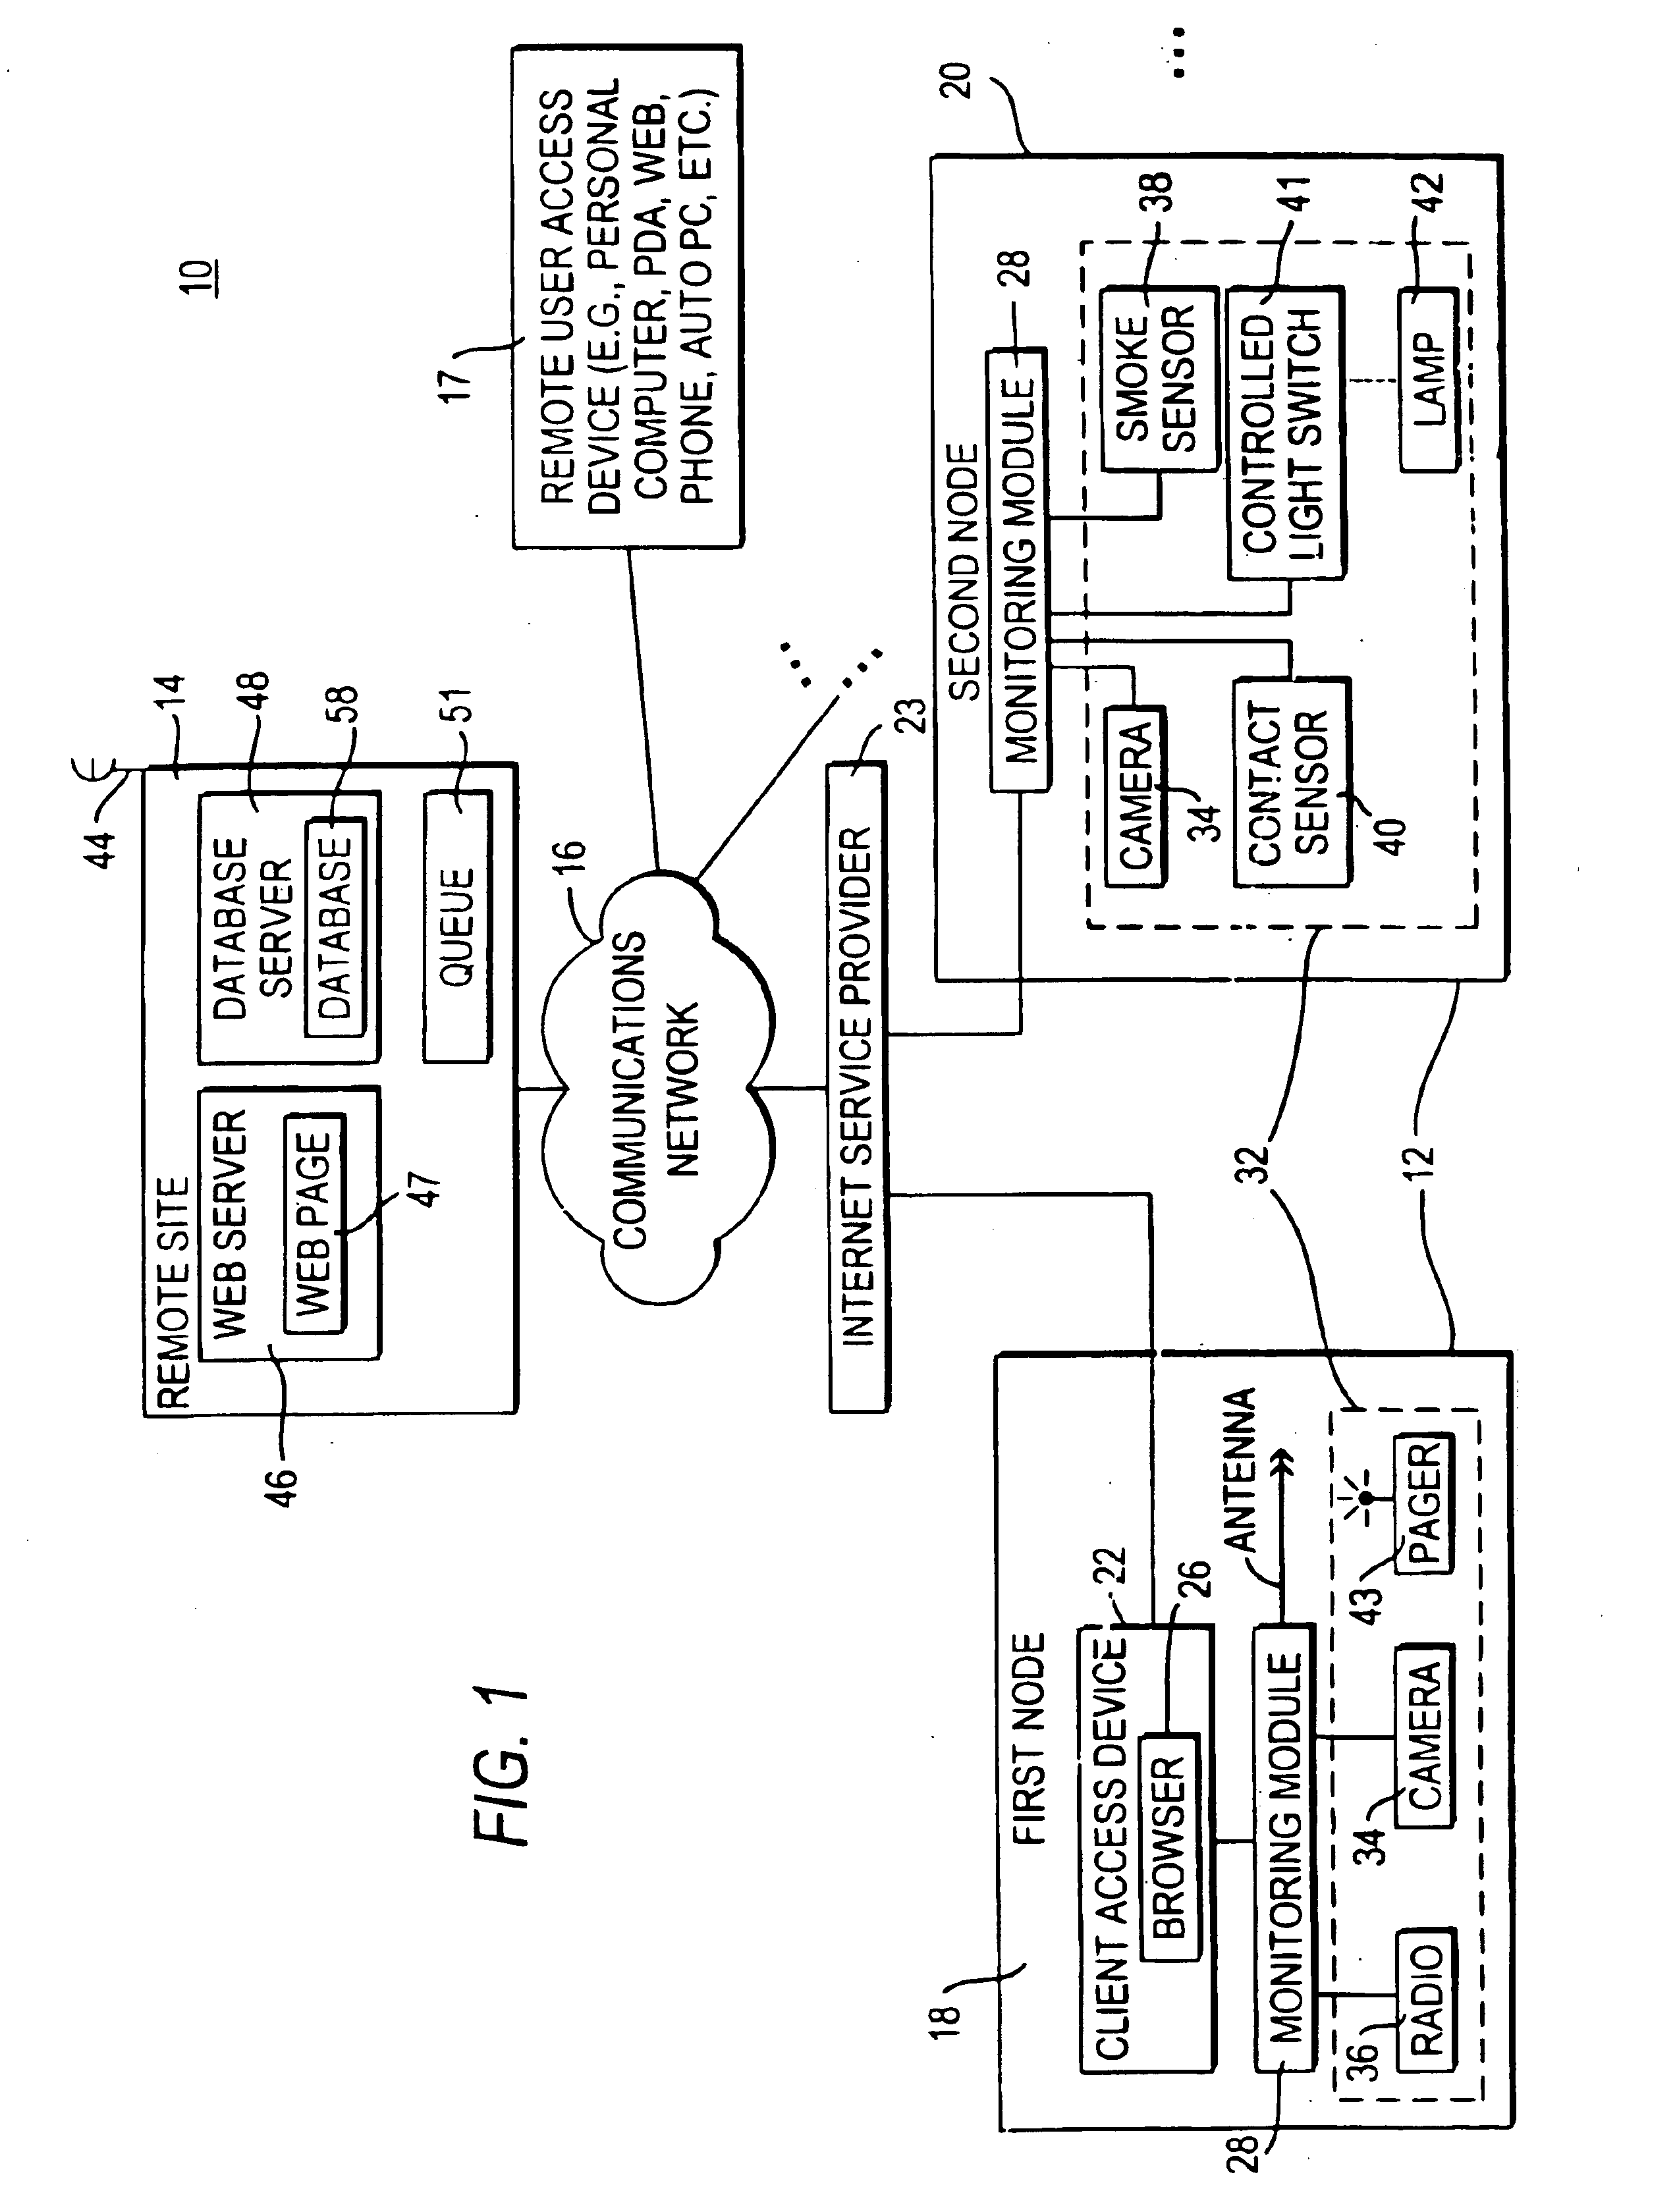 Systems and methods for the automatic registration of devices